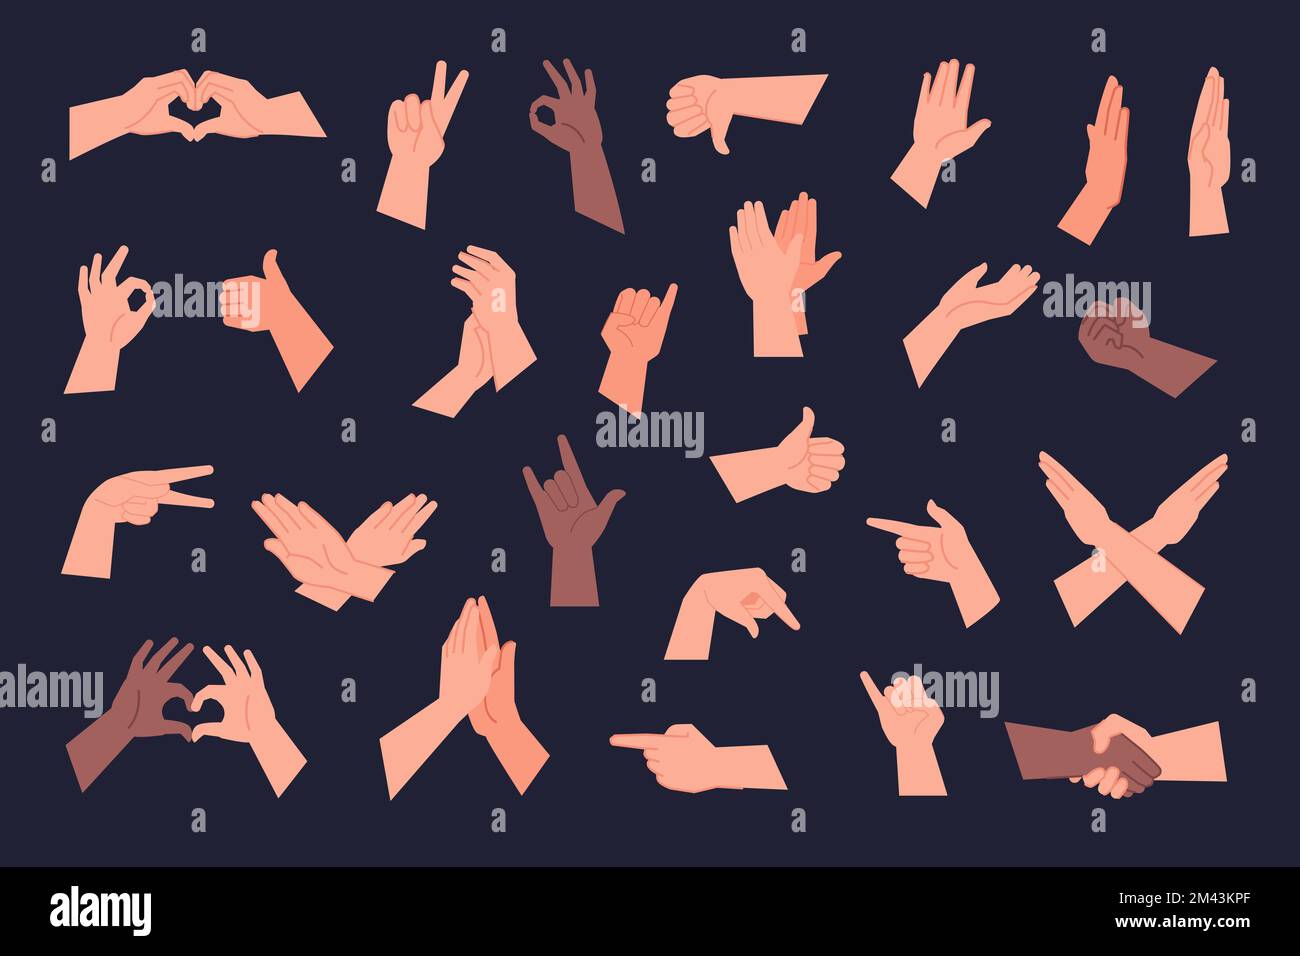 Palms poses. Hand gestures with clenched fingers, arm showing something thumb up ok five number gesture pinch wrist pose, handshake handing applause set vector illustration of palm hand gesture Stock Vector